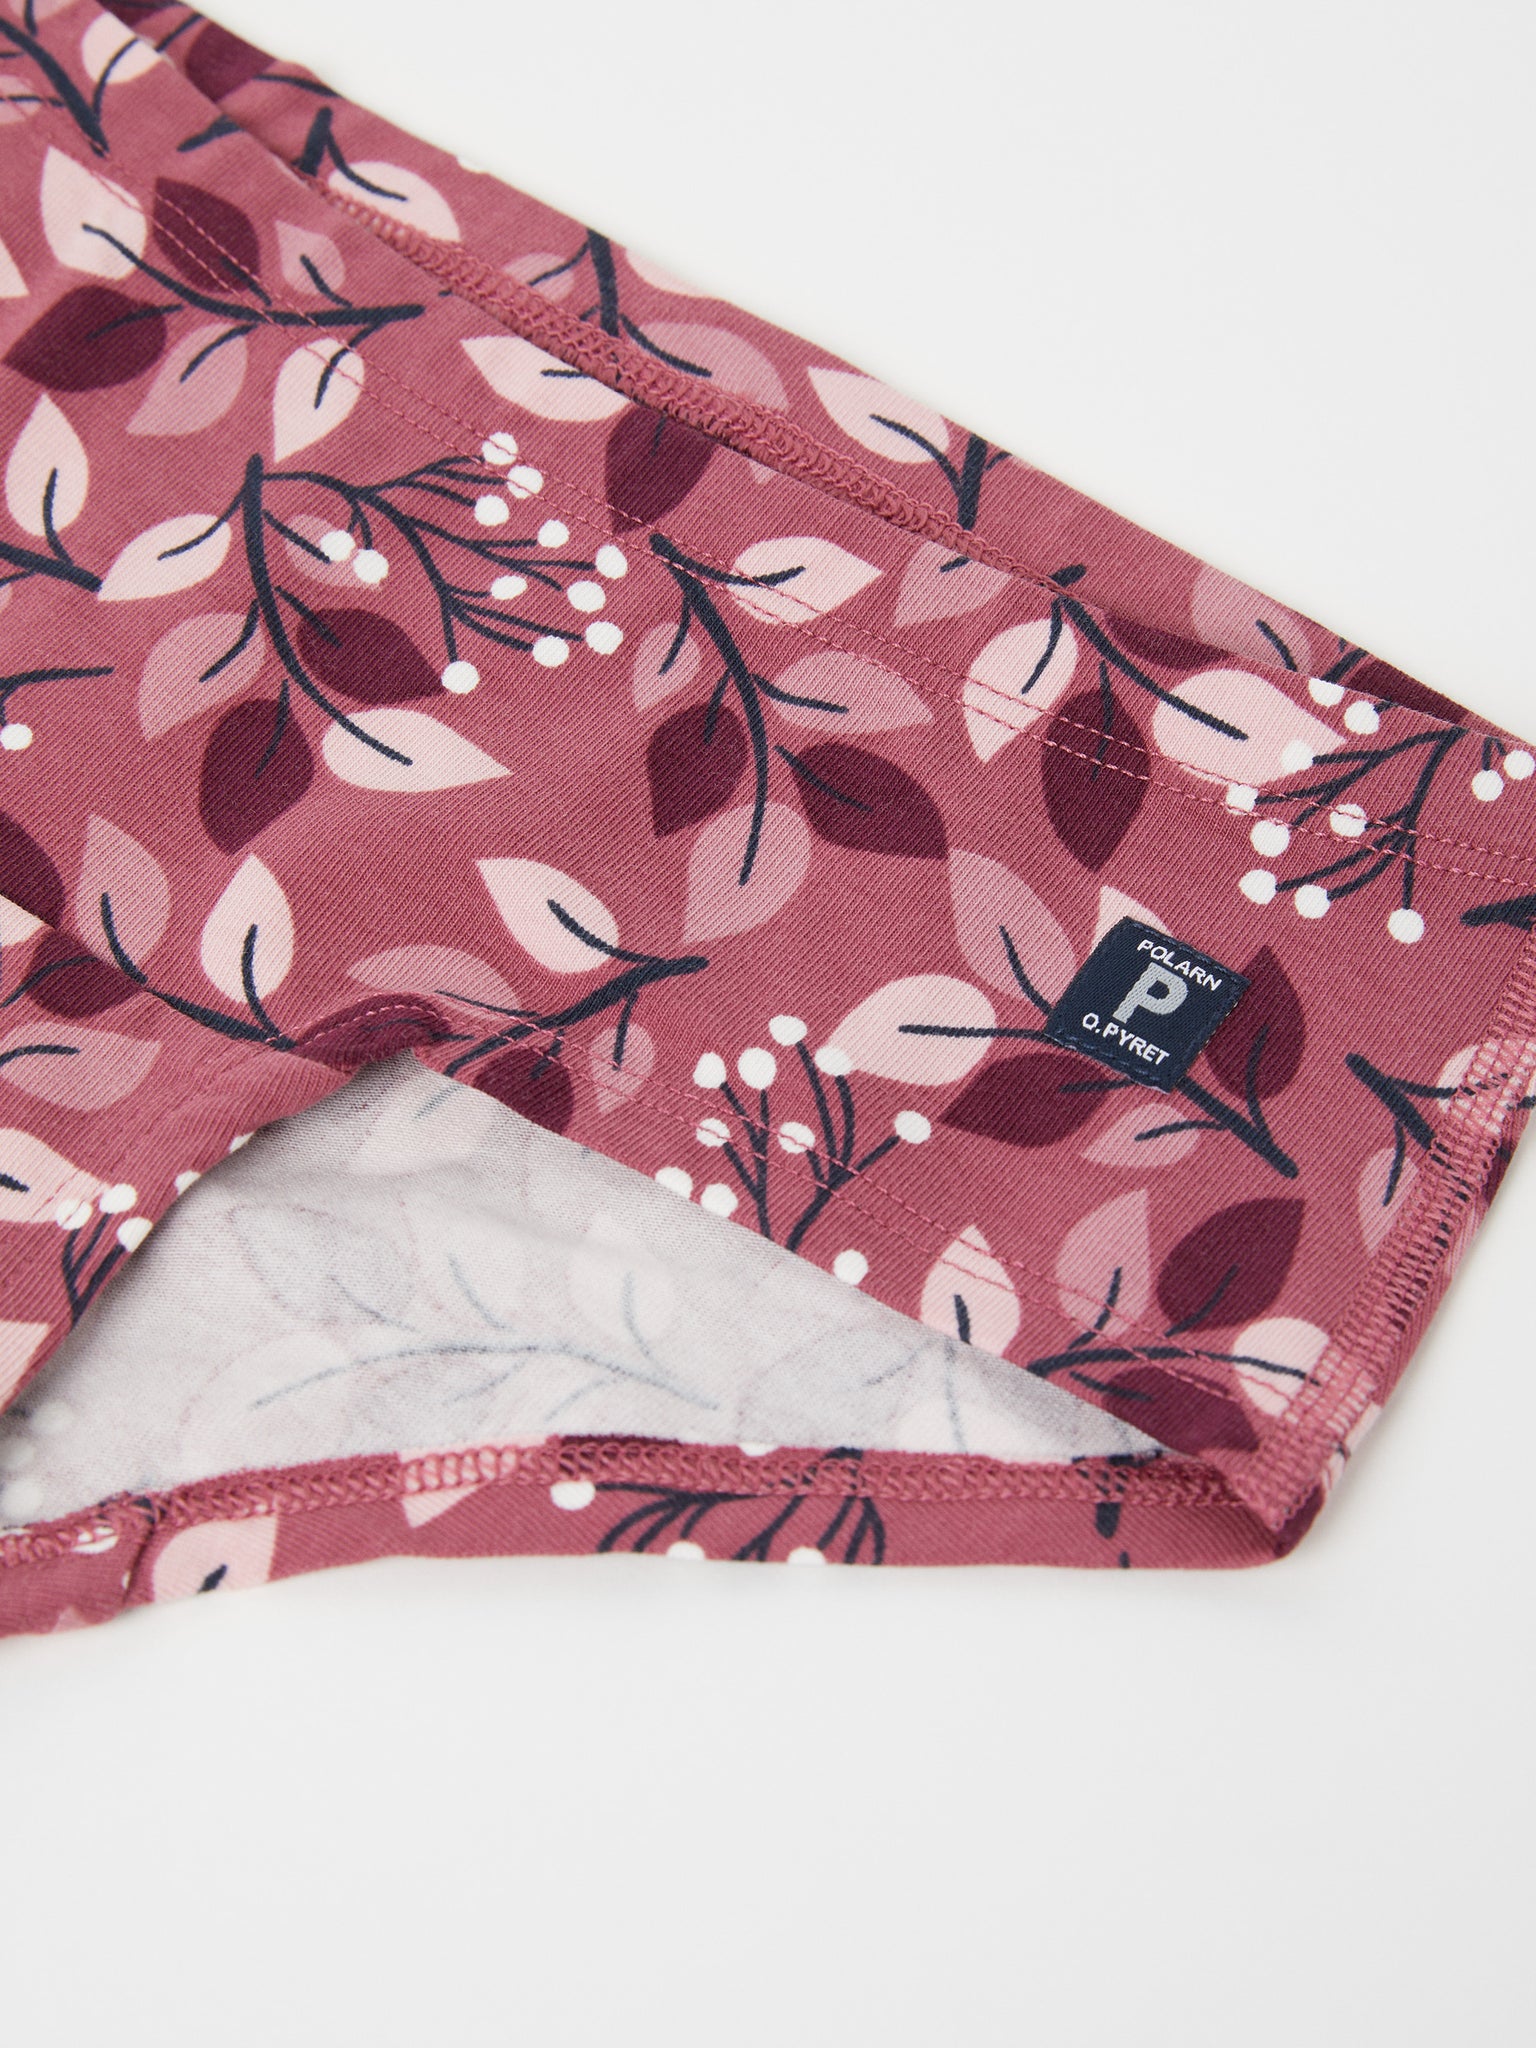 Organic Cotton Girls Hipster Briefs from the Polarn O. Pyret kids collection. Ethically produced kids clothing.